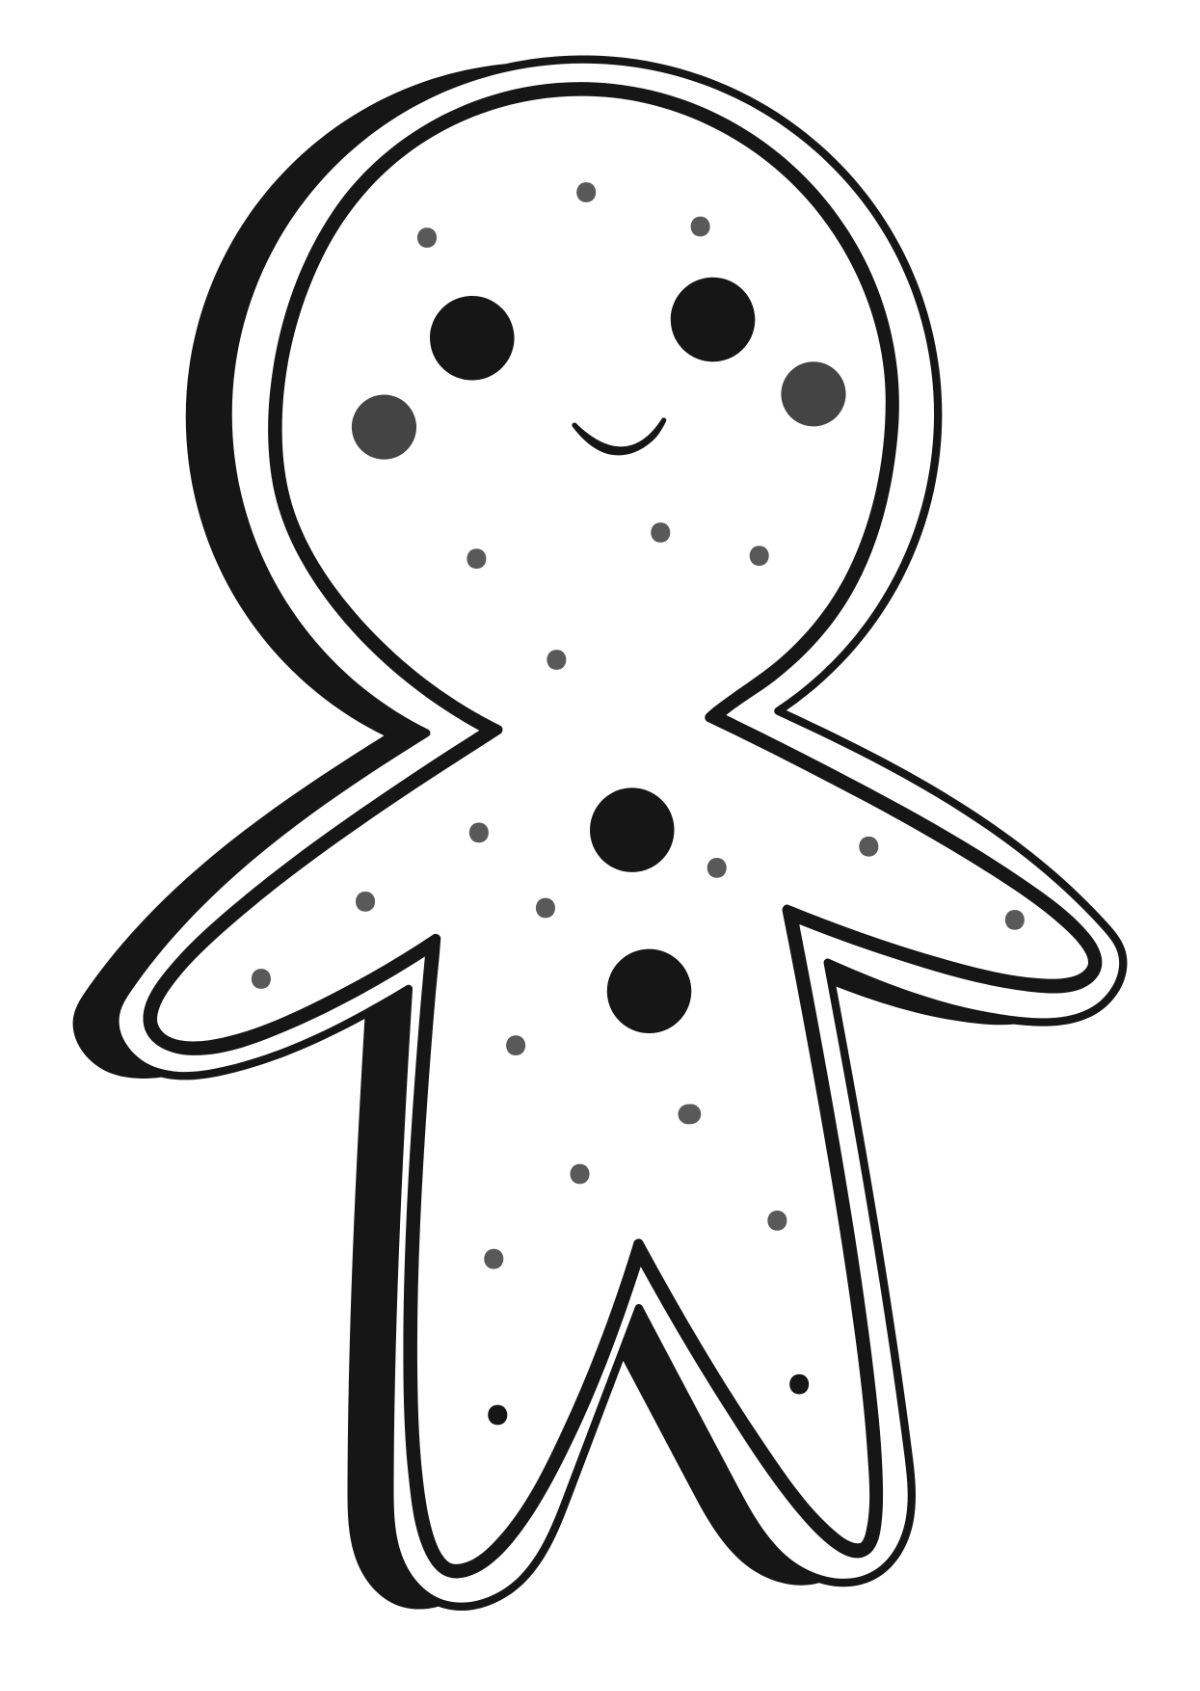 How to Draw a Gingerbread Man Real Easy - YouTube